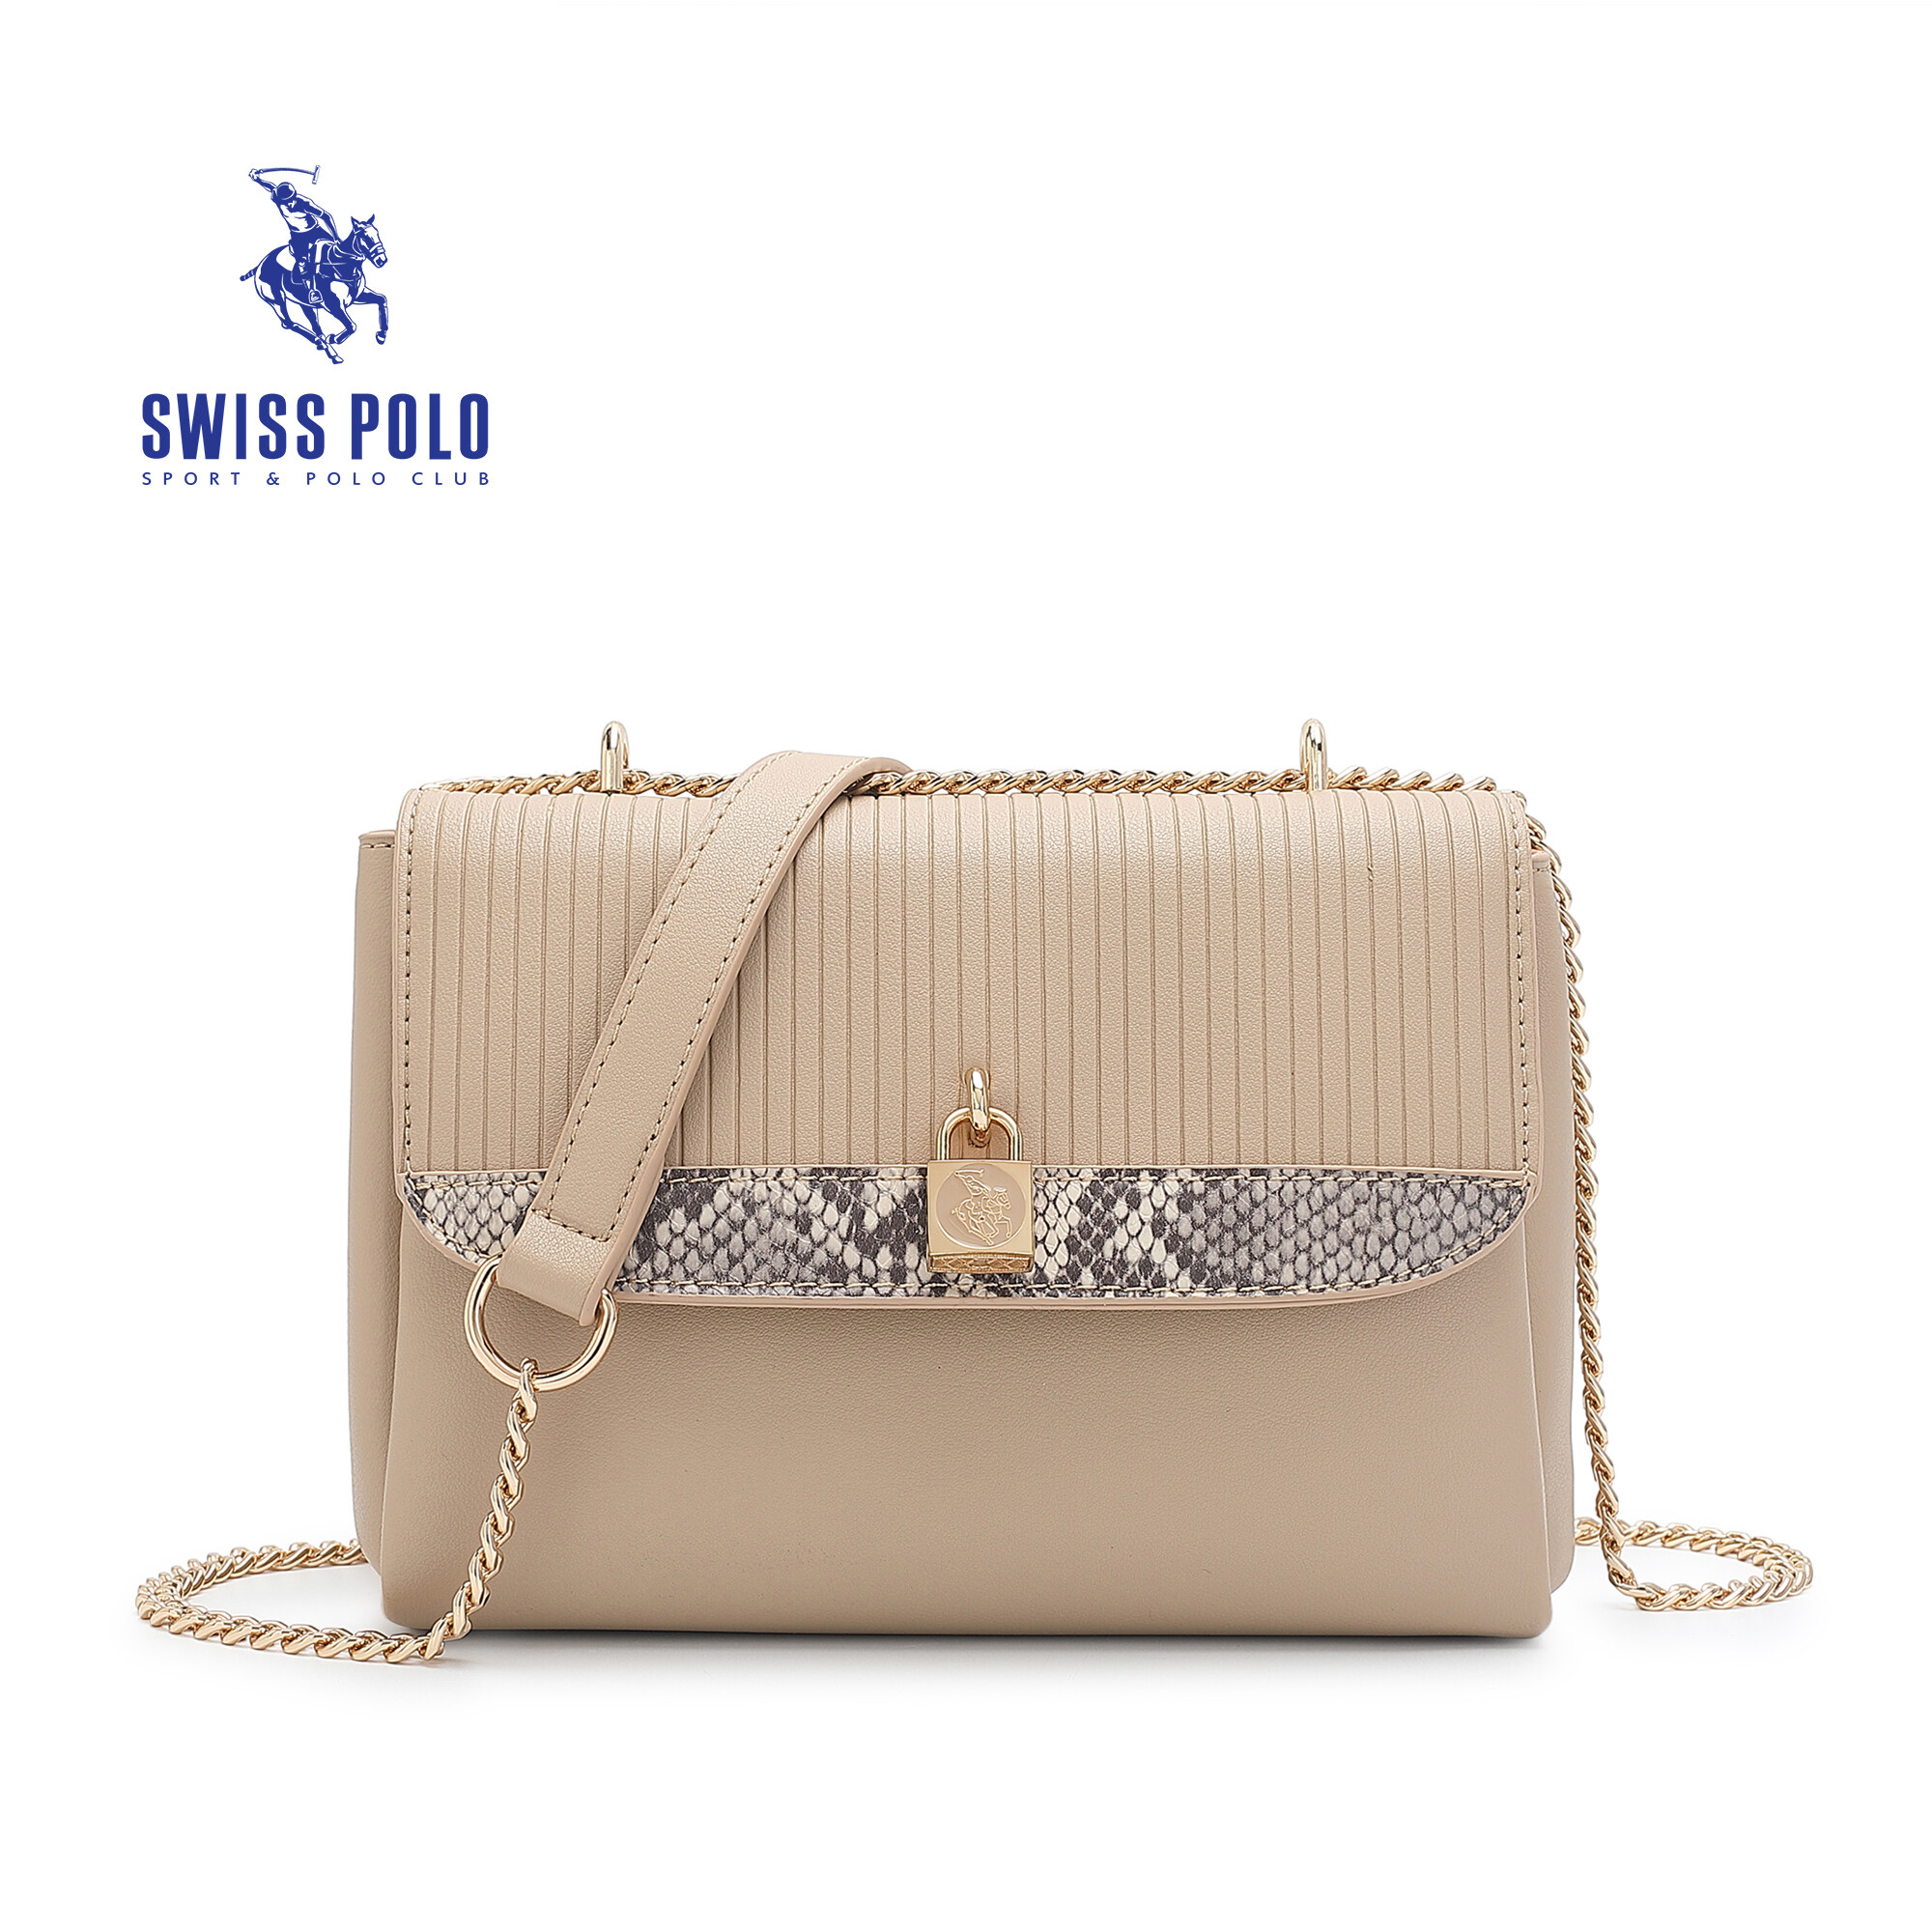 SWISS POLO Ladies Chain Sling Bag HHF 3174-4 APRICOT